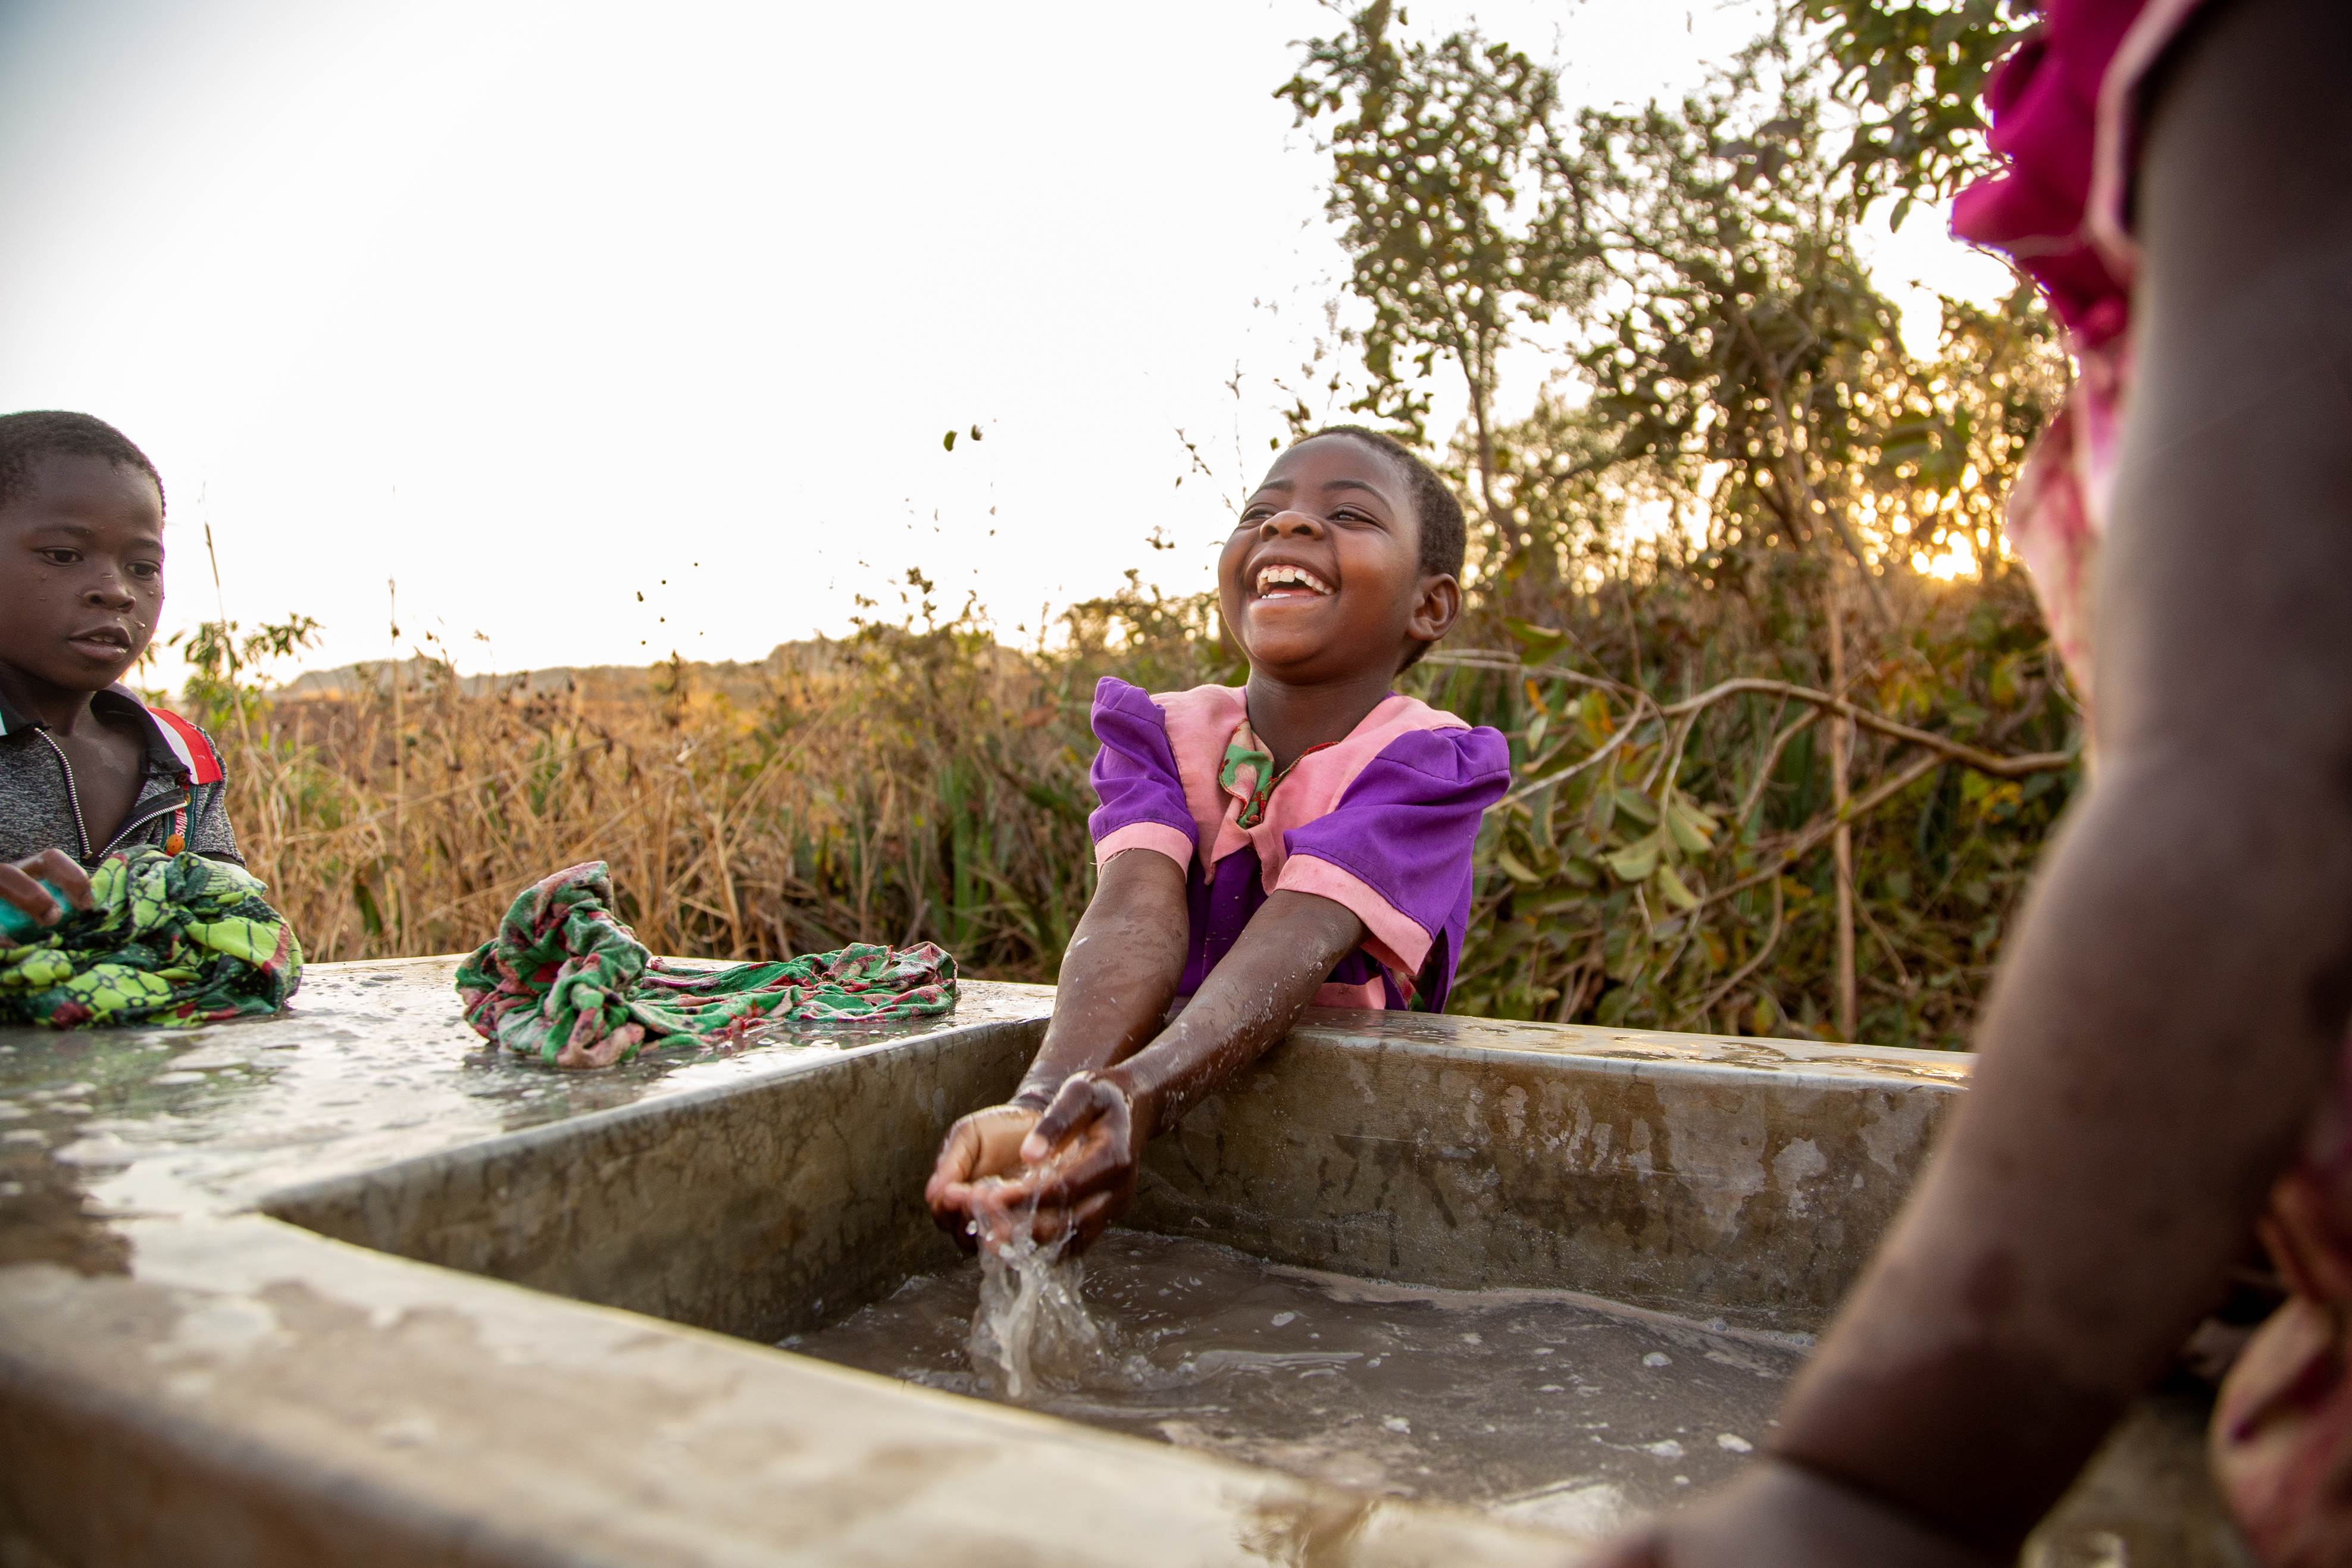 Girl from Malawi in bright purple dress laughing as she plays with the water from a local well